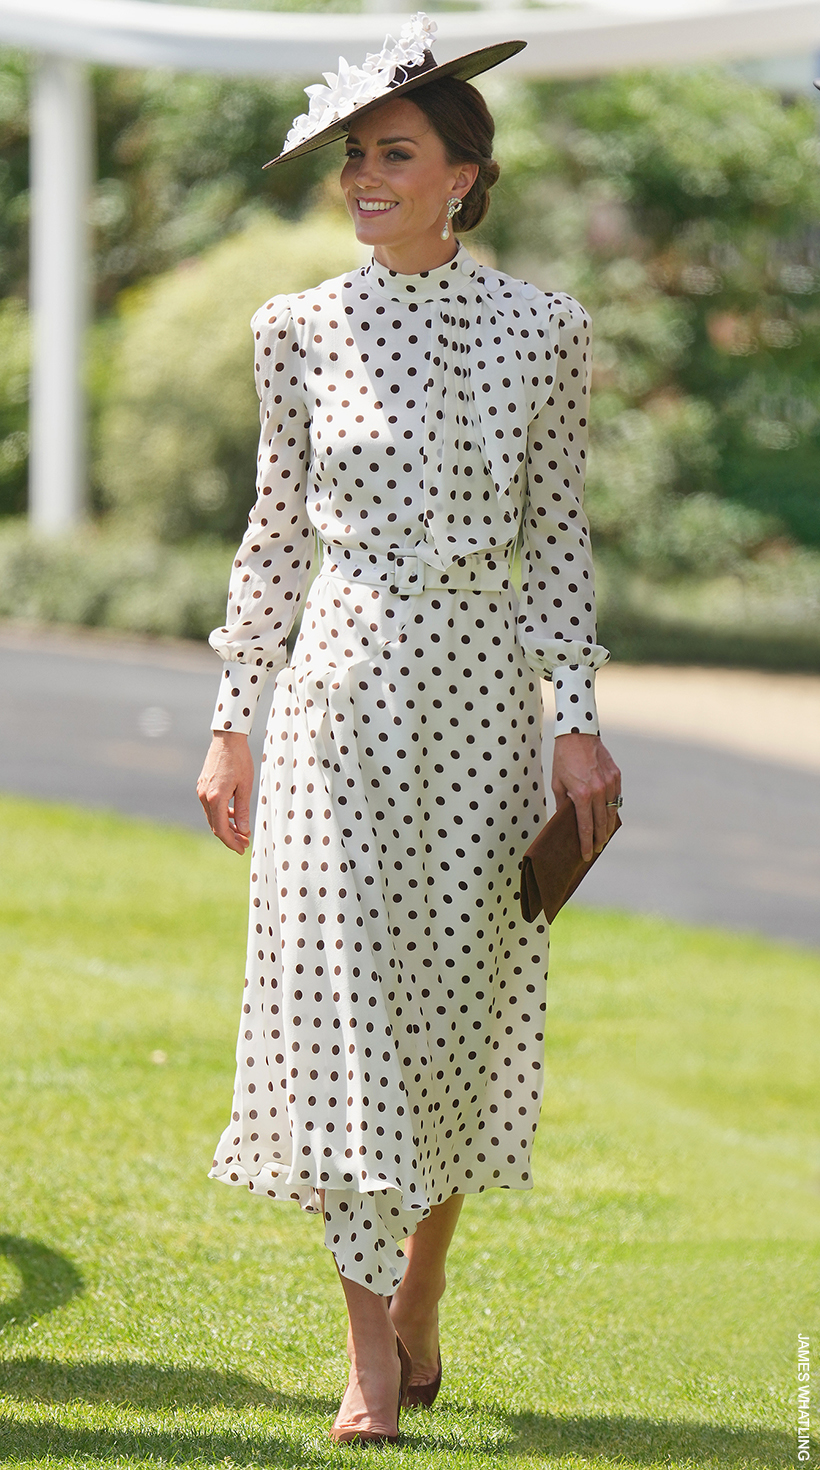 Polka-dot princess! Kate is radiant in Alessandra Rich dress as she arrives  for Garter Day